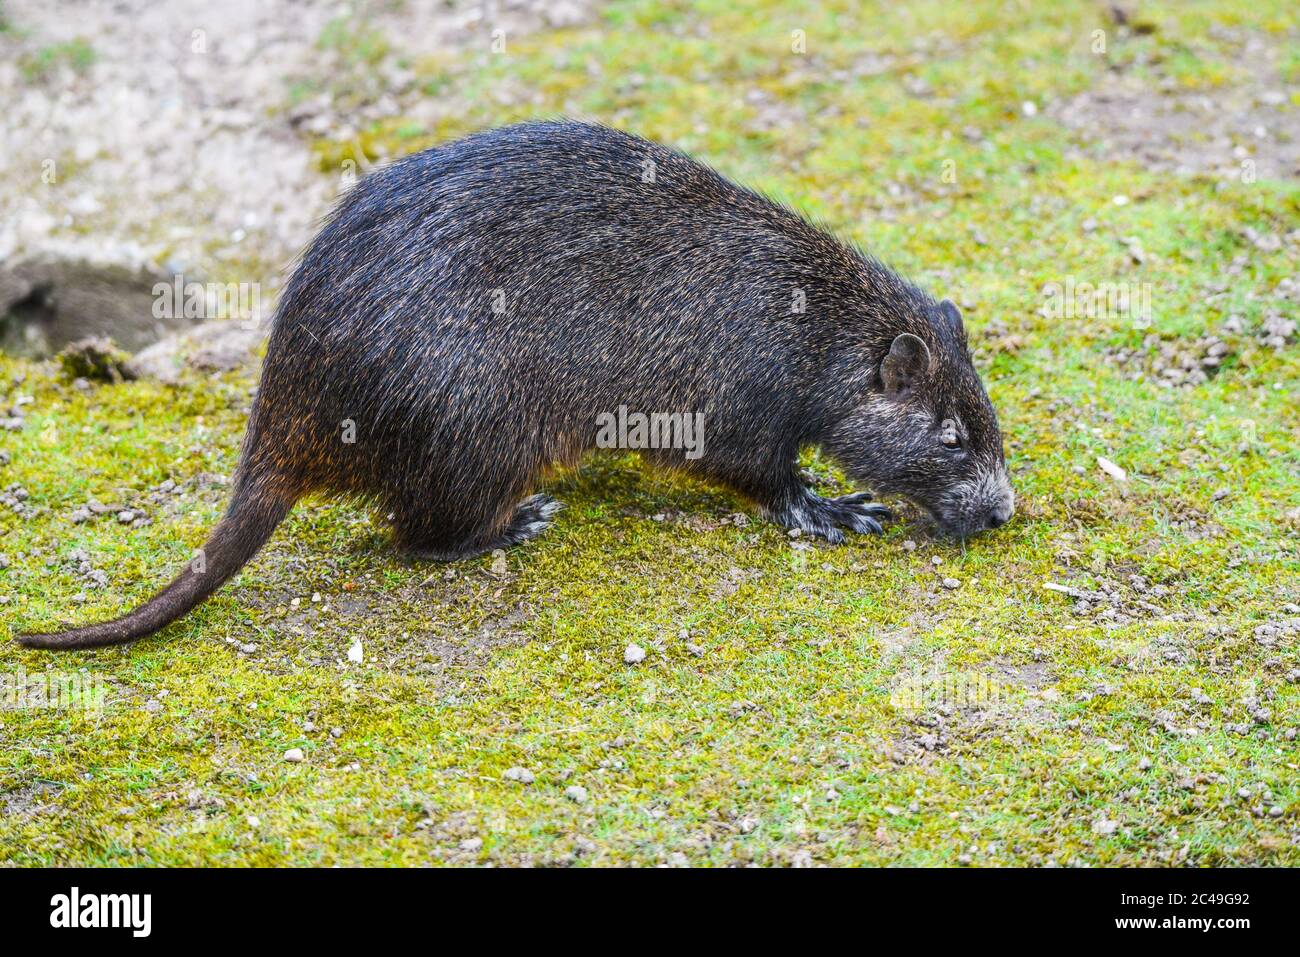 Desmarests hutia or Cuban hutia, Capromys pilorides. Endemic rodent from Cuba, Central America. Stock Photo